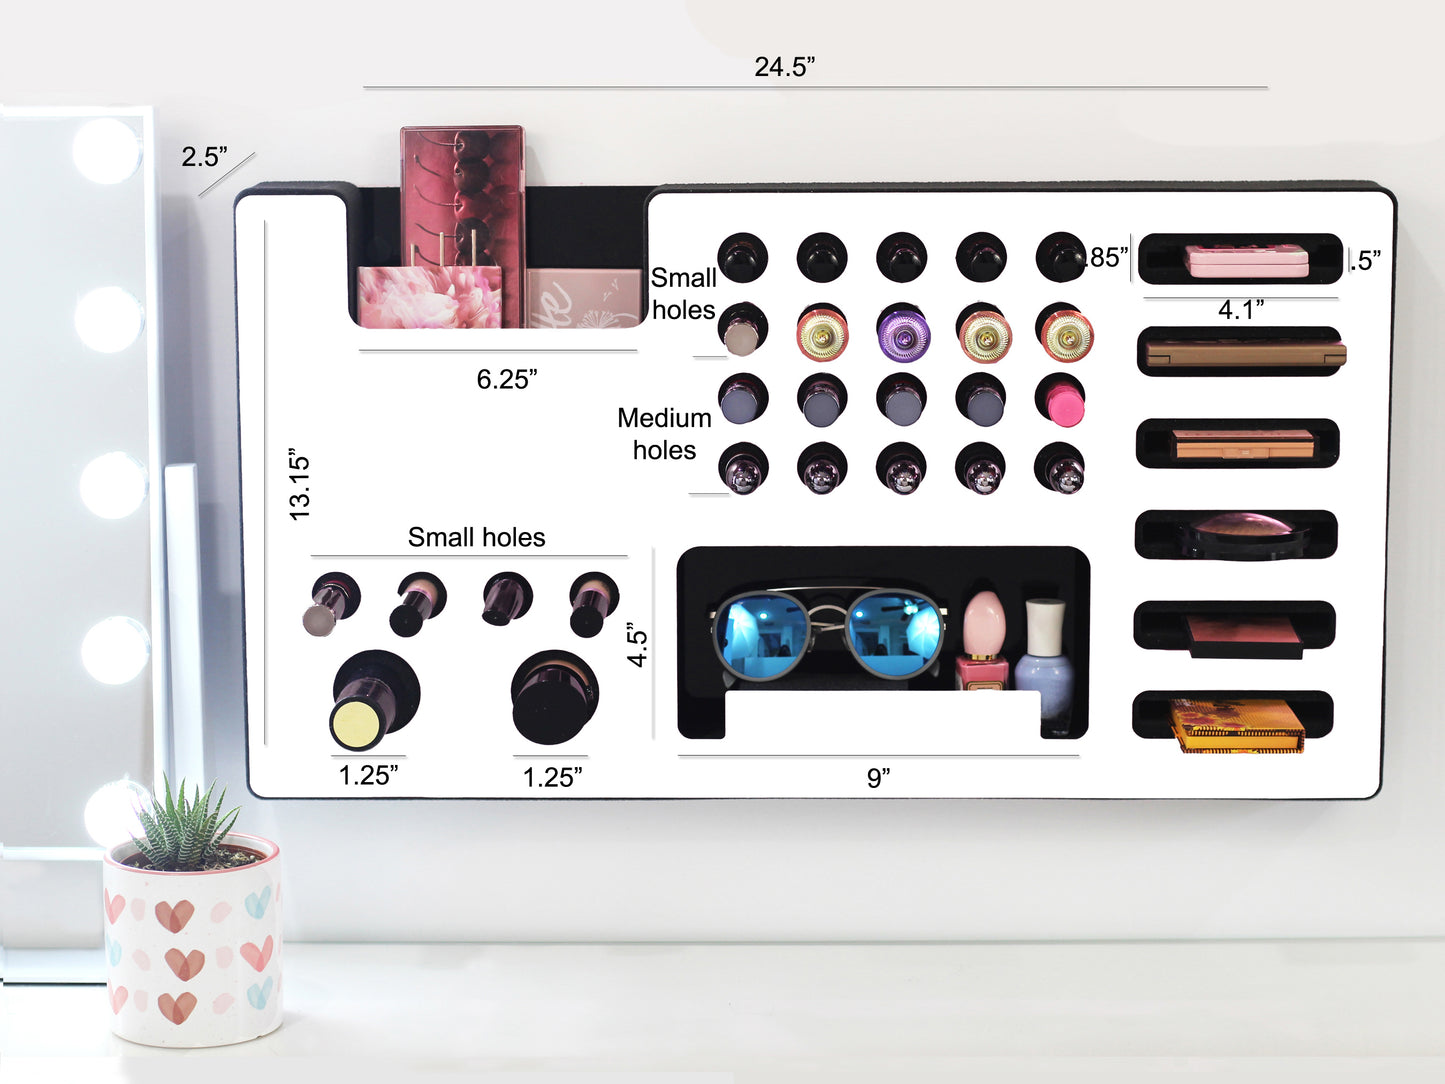 Measurements for Black Ultra Complete Makeup Organizer Solution - Lipstick Palette Brush Foundation Holder. Organizer on display in this photo is white for better readability. .